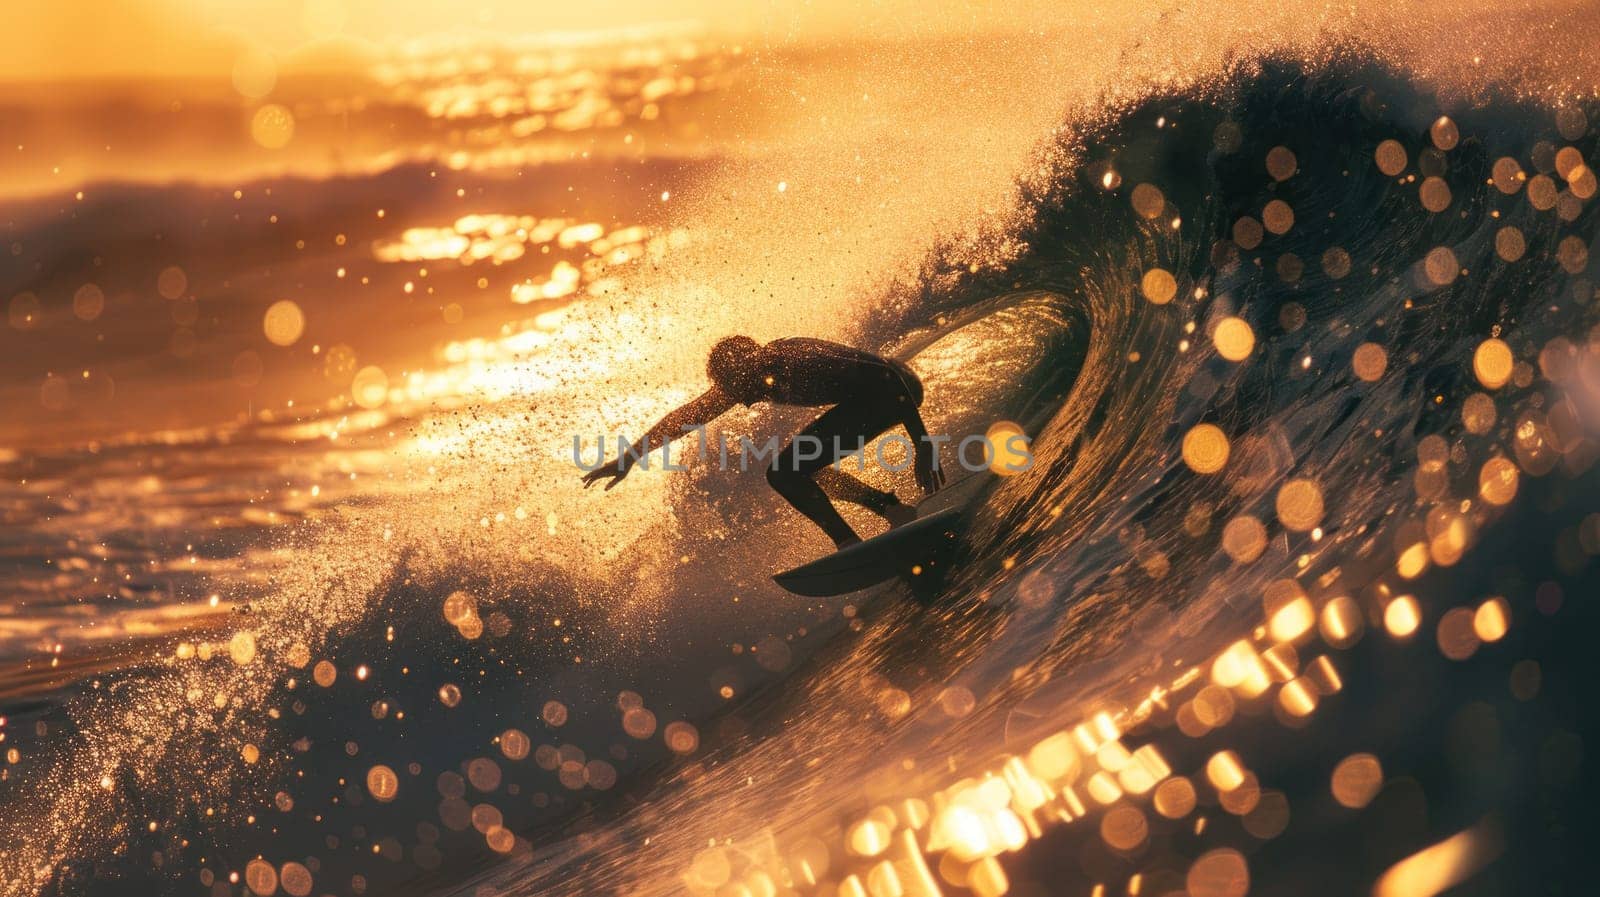 A surfer is riding a wave in the ocean by golfmerrymaker